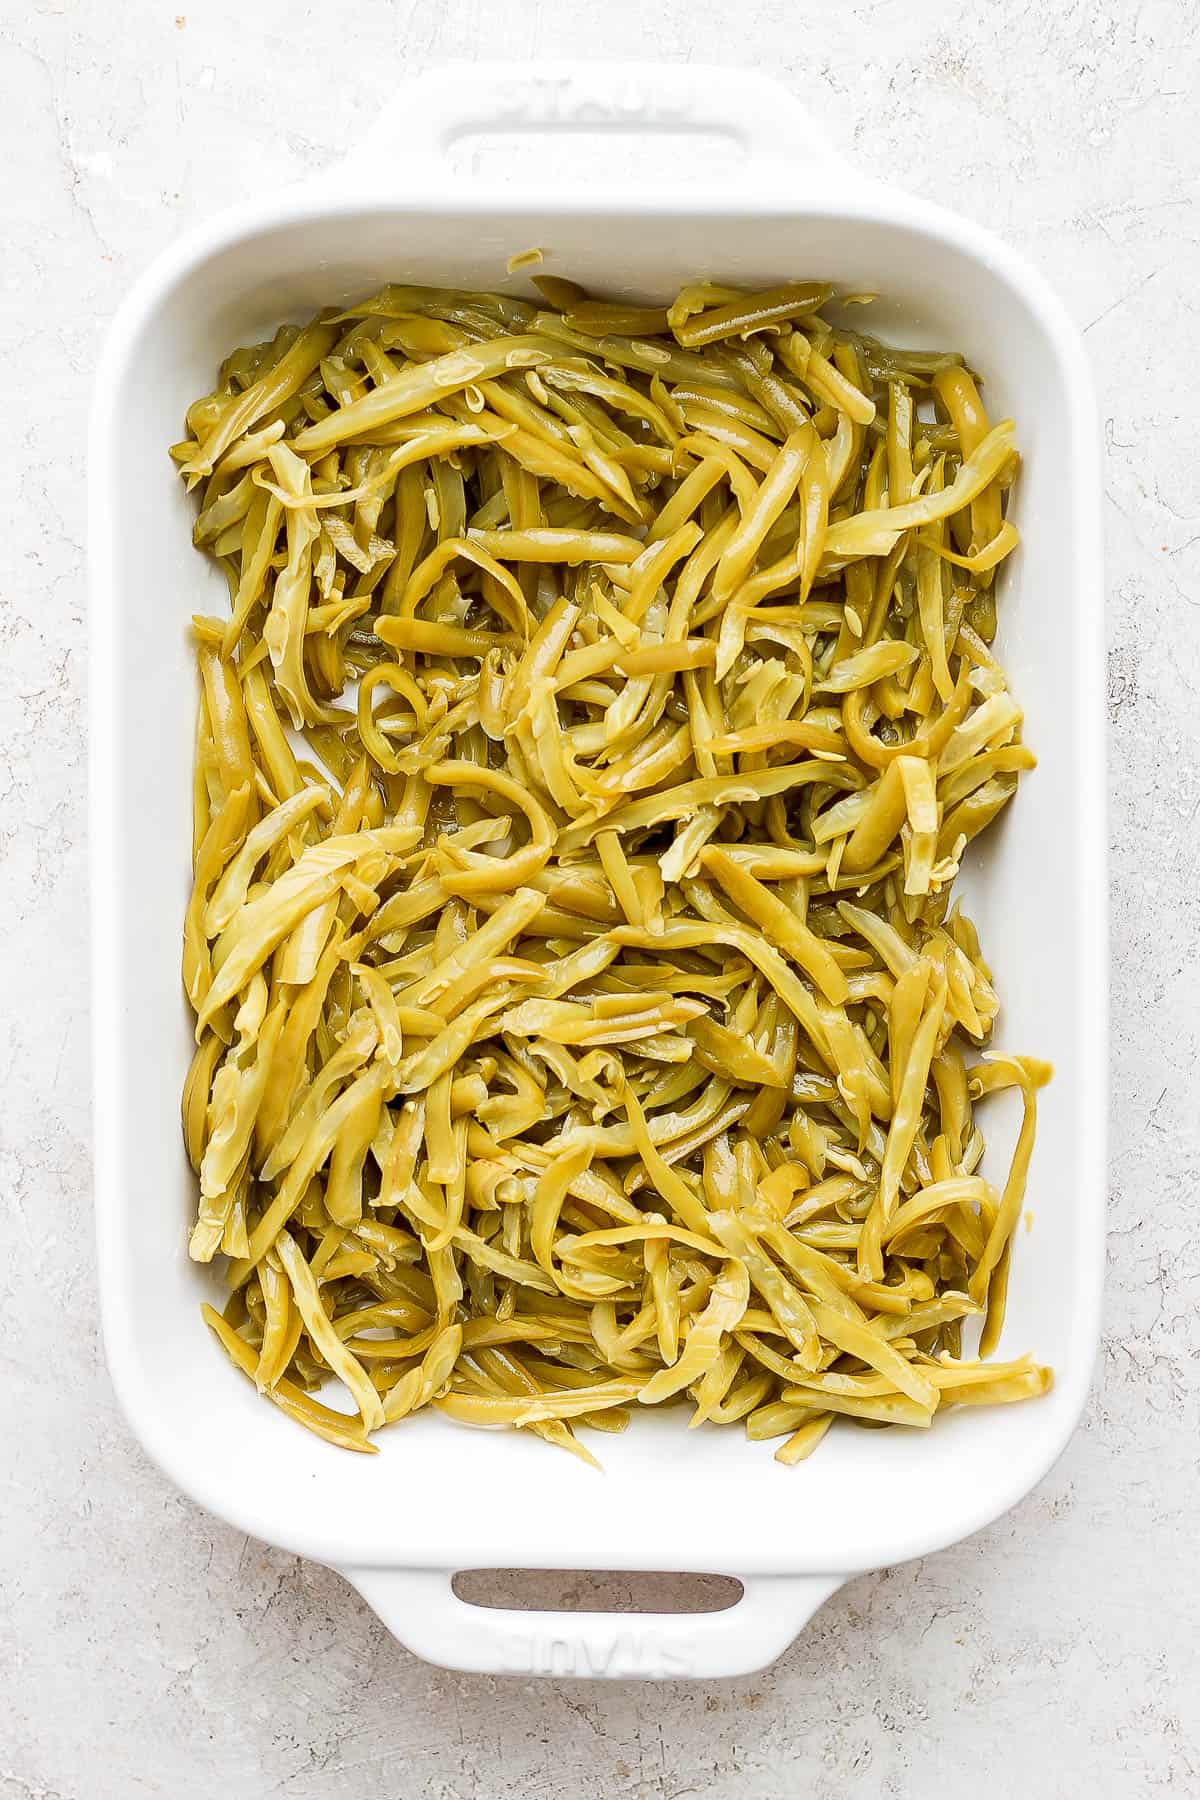 Canned, french-cut style green beans in a baking dish.